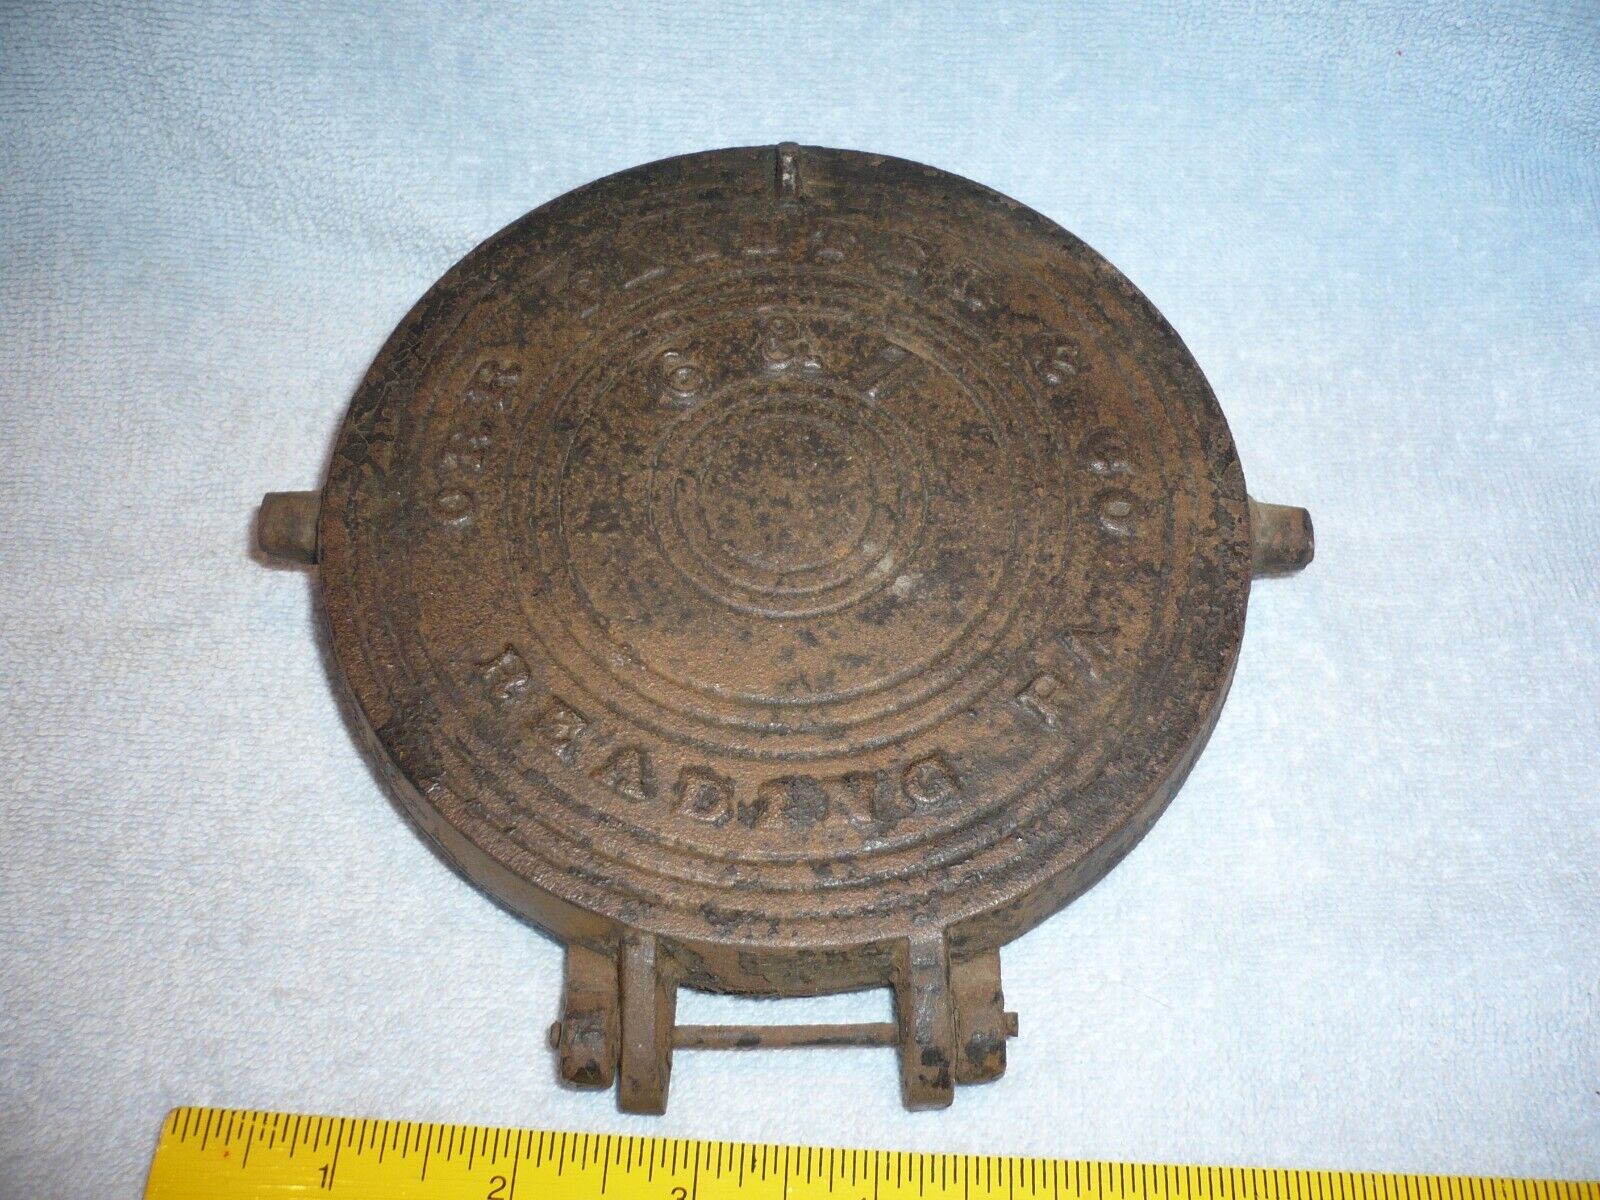 ORR PAINTER & CO. READING, PA. C. 1886-1898, cast-iron Waffle Maker 6 and 7 free